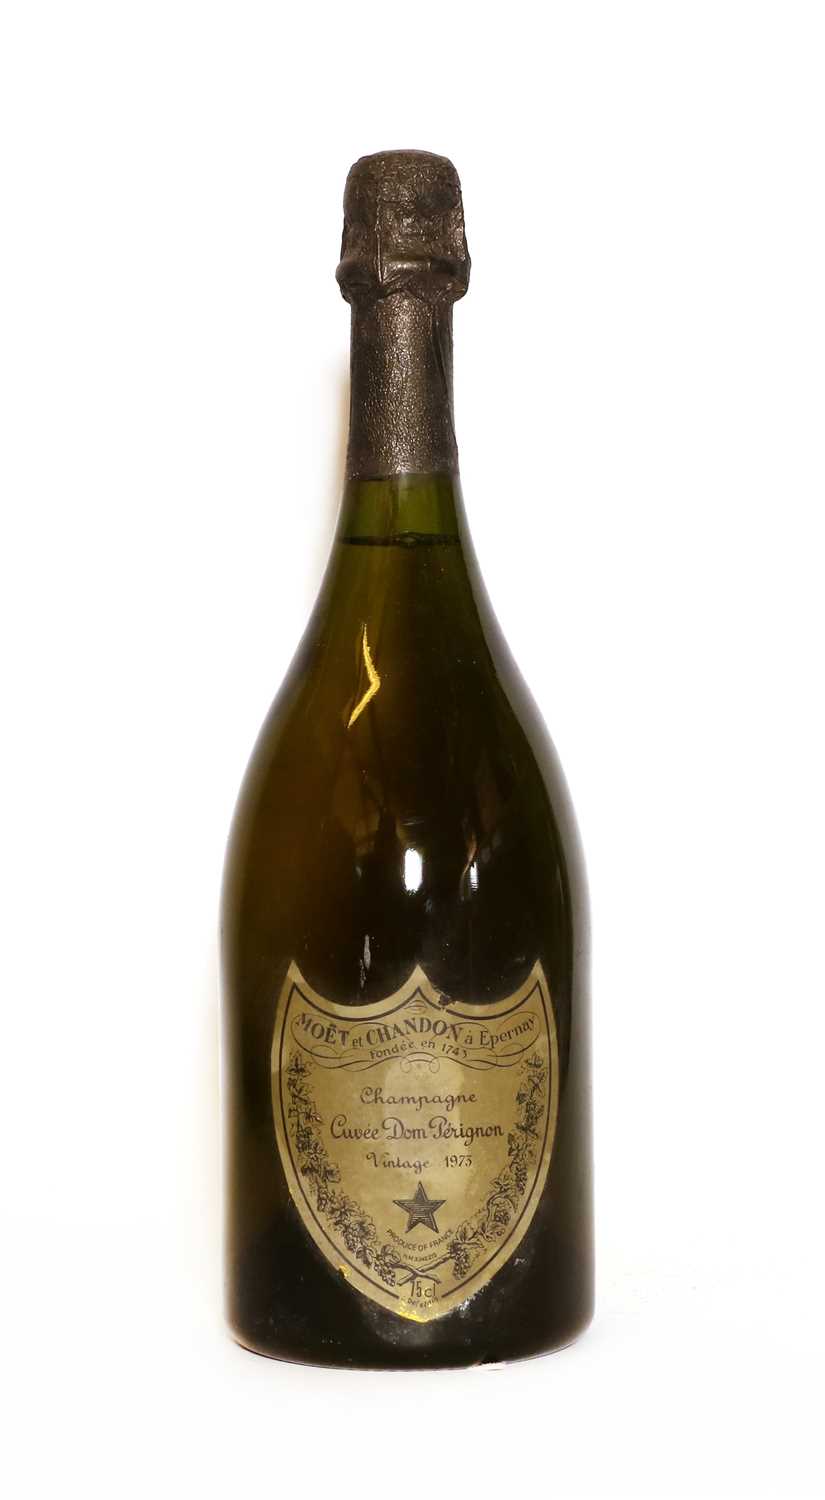 Lot 20 - Moet & Chandon, Epernay, Dom Perignon, 1973, scuffs to label (1)